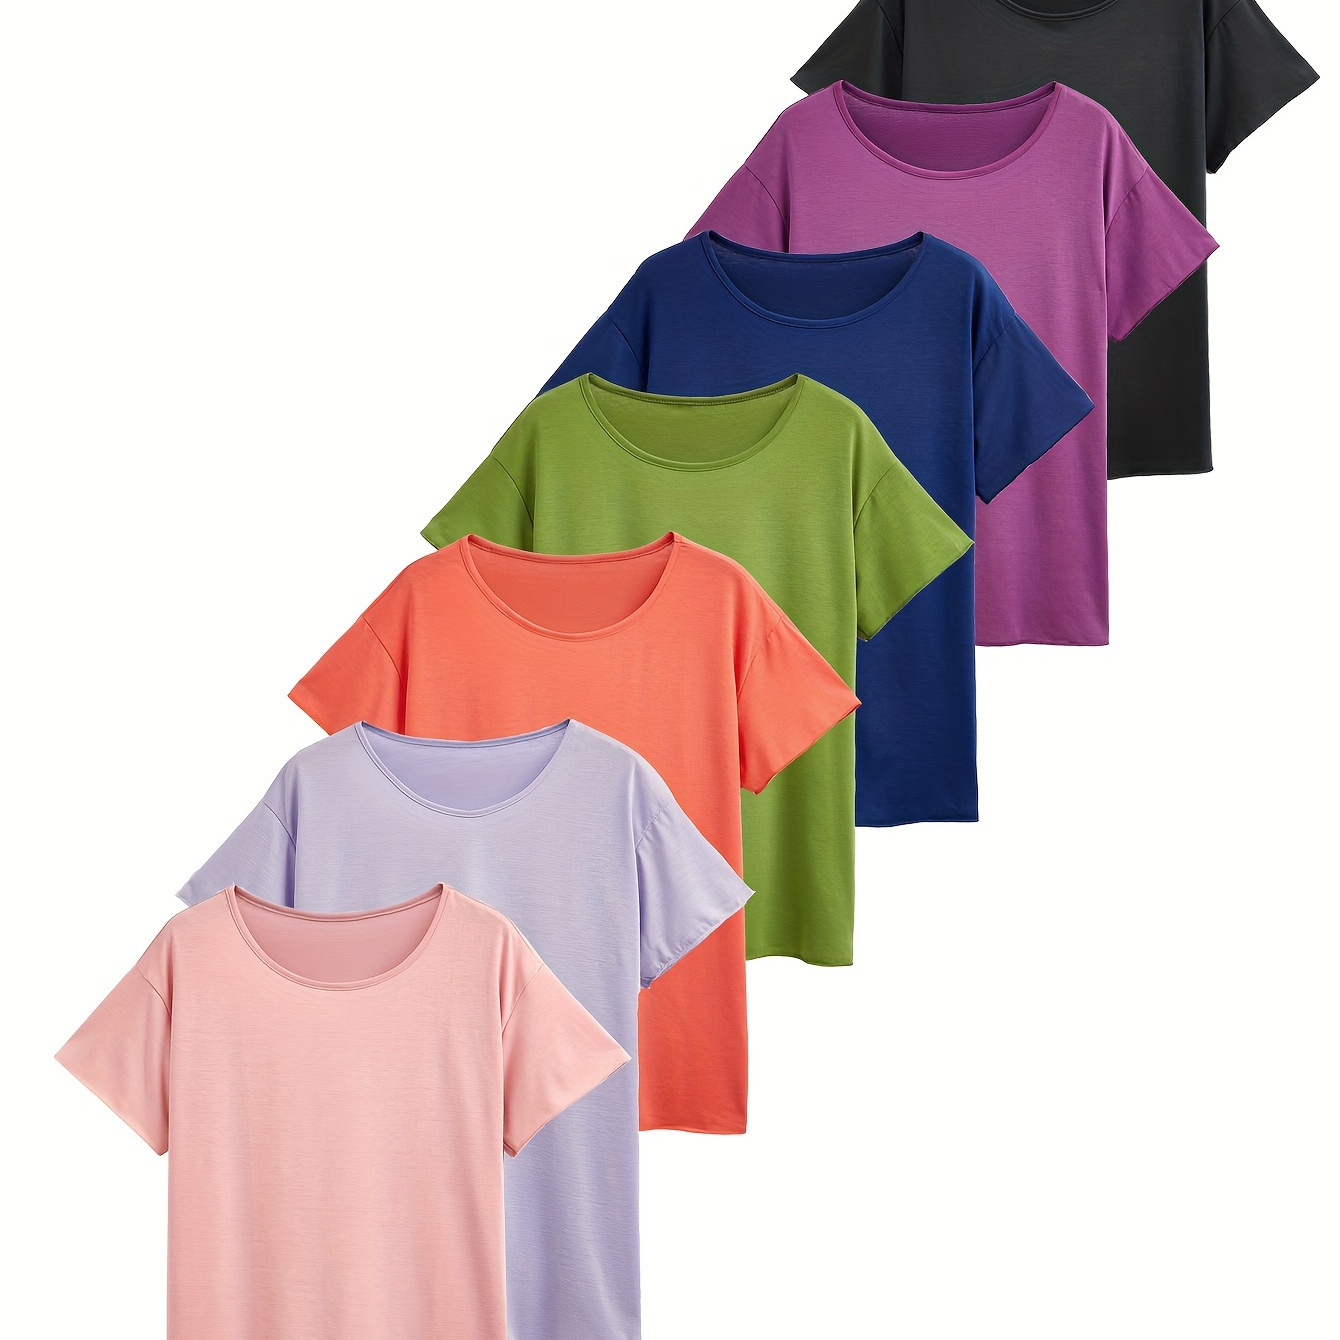 

7-pack Women's Casual Sports T-shirts, Solid Color Comfort Fit Crew Neck Short Sleeve Everyday Wear T-shirt